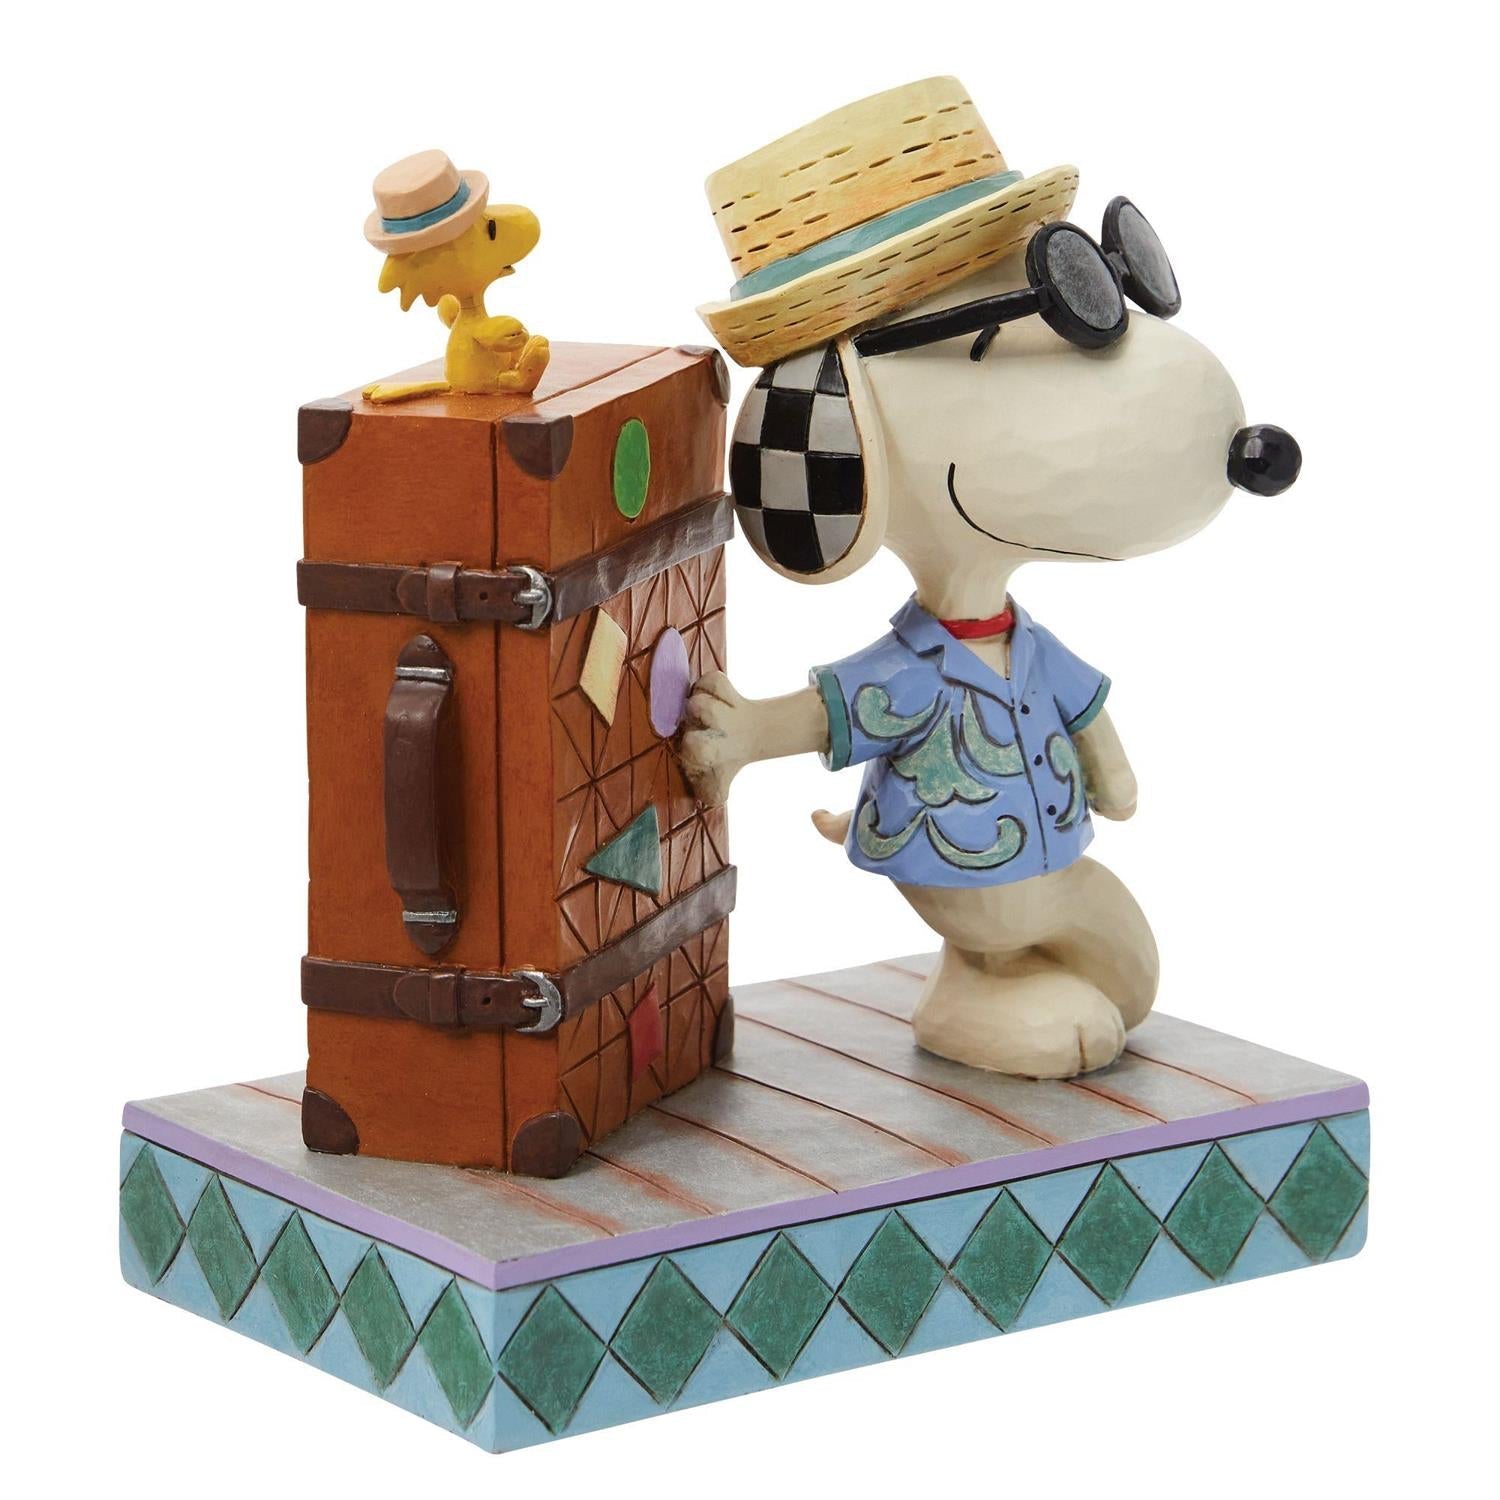 Jim Shore "Traveling Pals" Snoopy & Woodstock Vacation